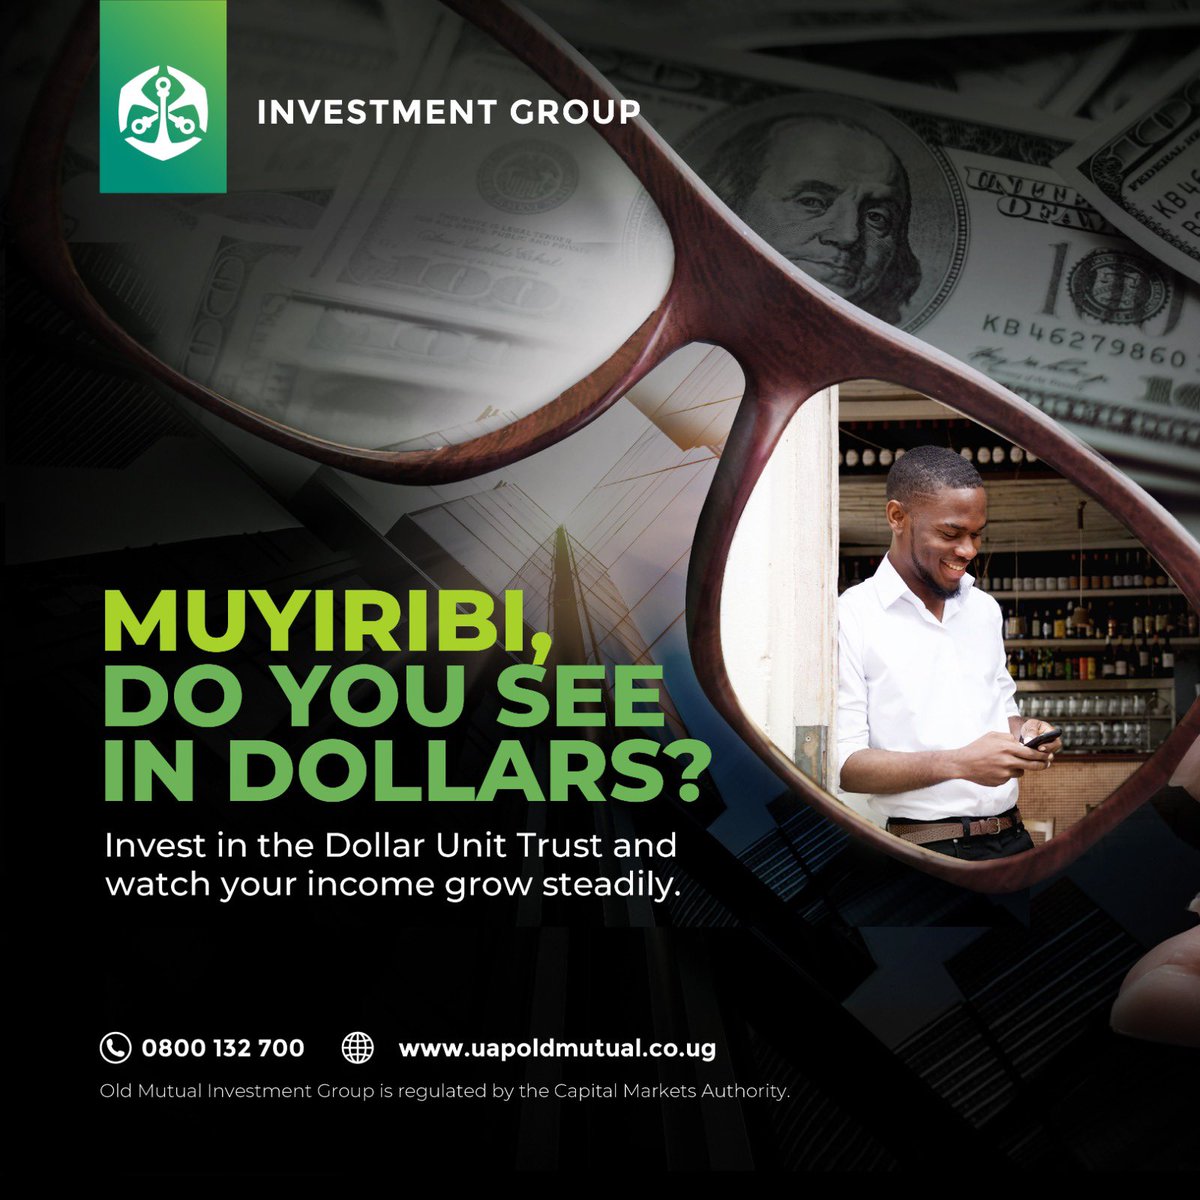 As a hustler, it’s always good to have investments. The #DollarUnitTrust  Fund is here to ensure that you have a sustainable future. Invest in the Dollar Unit Trust and watch your income grow steadily. 

For more information you can reach to them via 0800132700. 

#TutambuleFfena